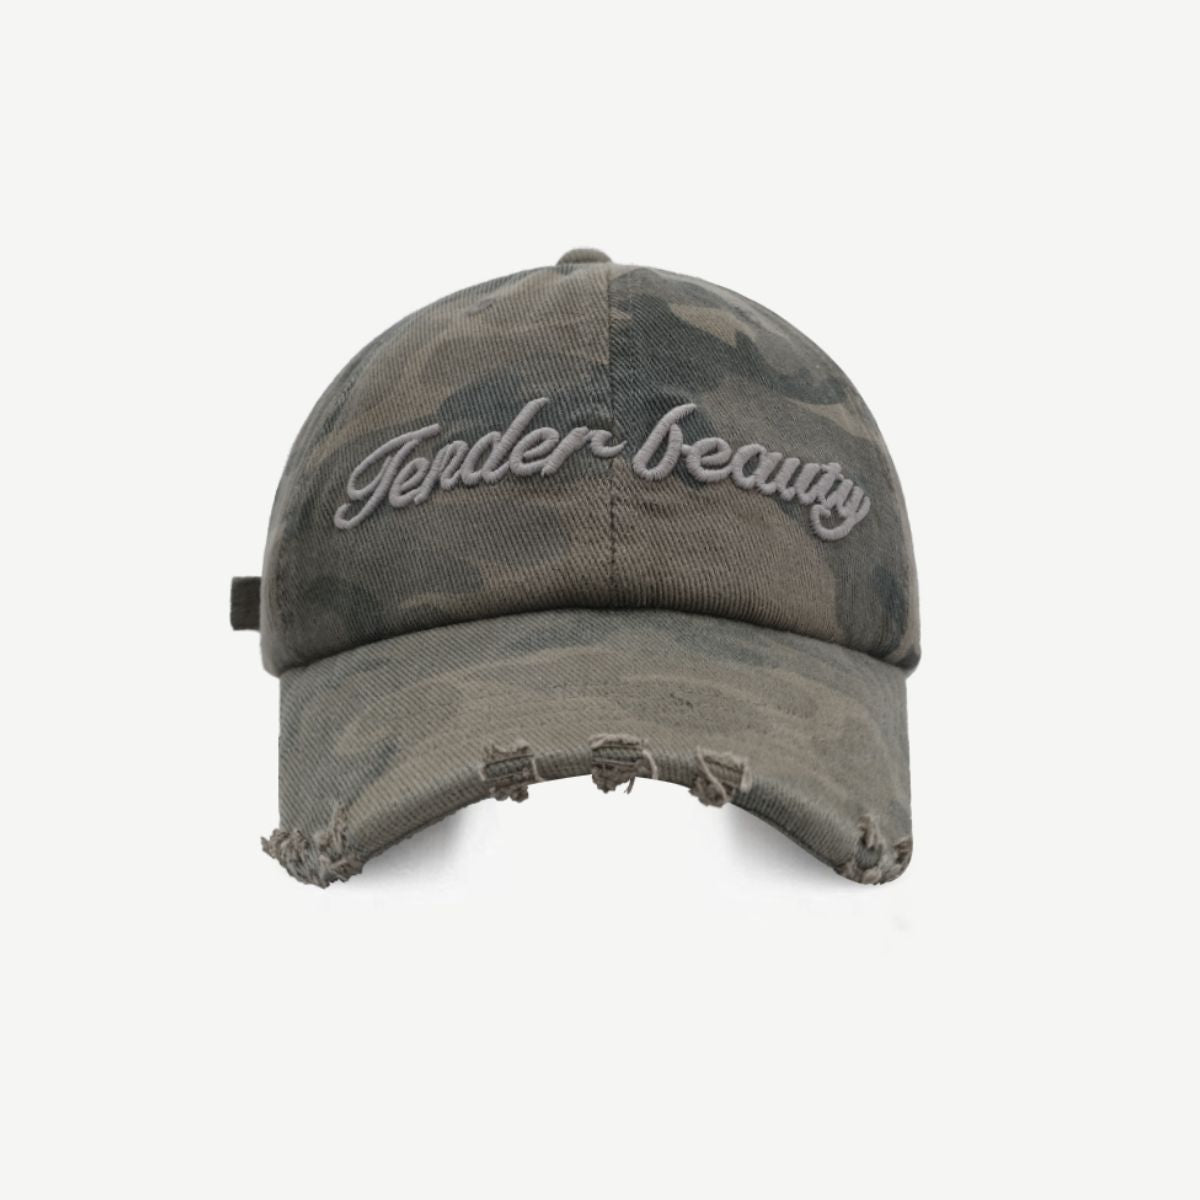 TEEK - Letter Graphic Camouflage Cotton Hat HAT TEEK Trend Charcoal  